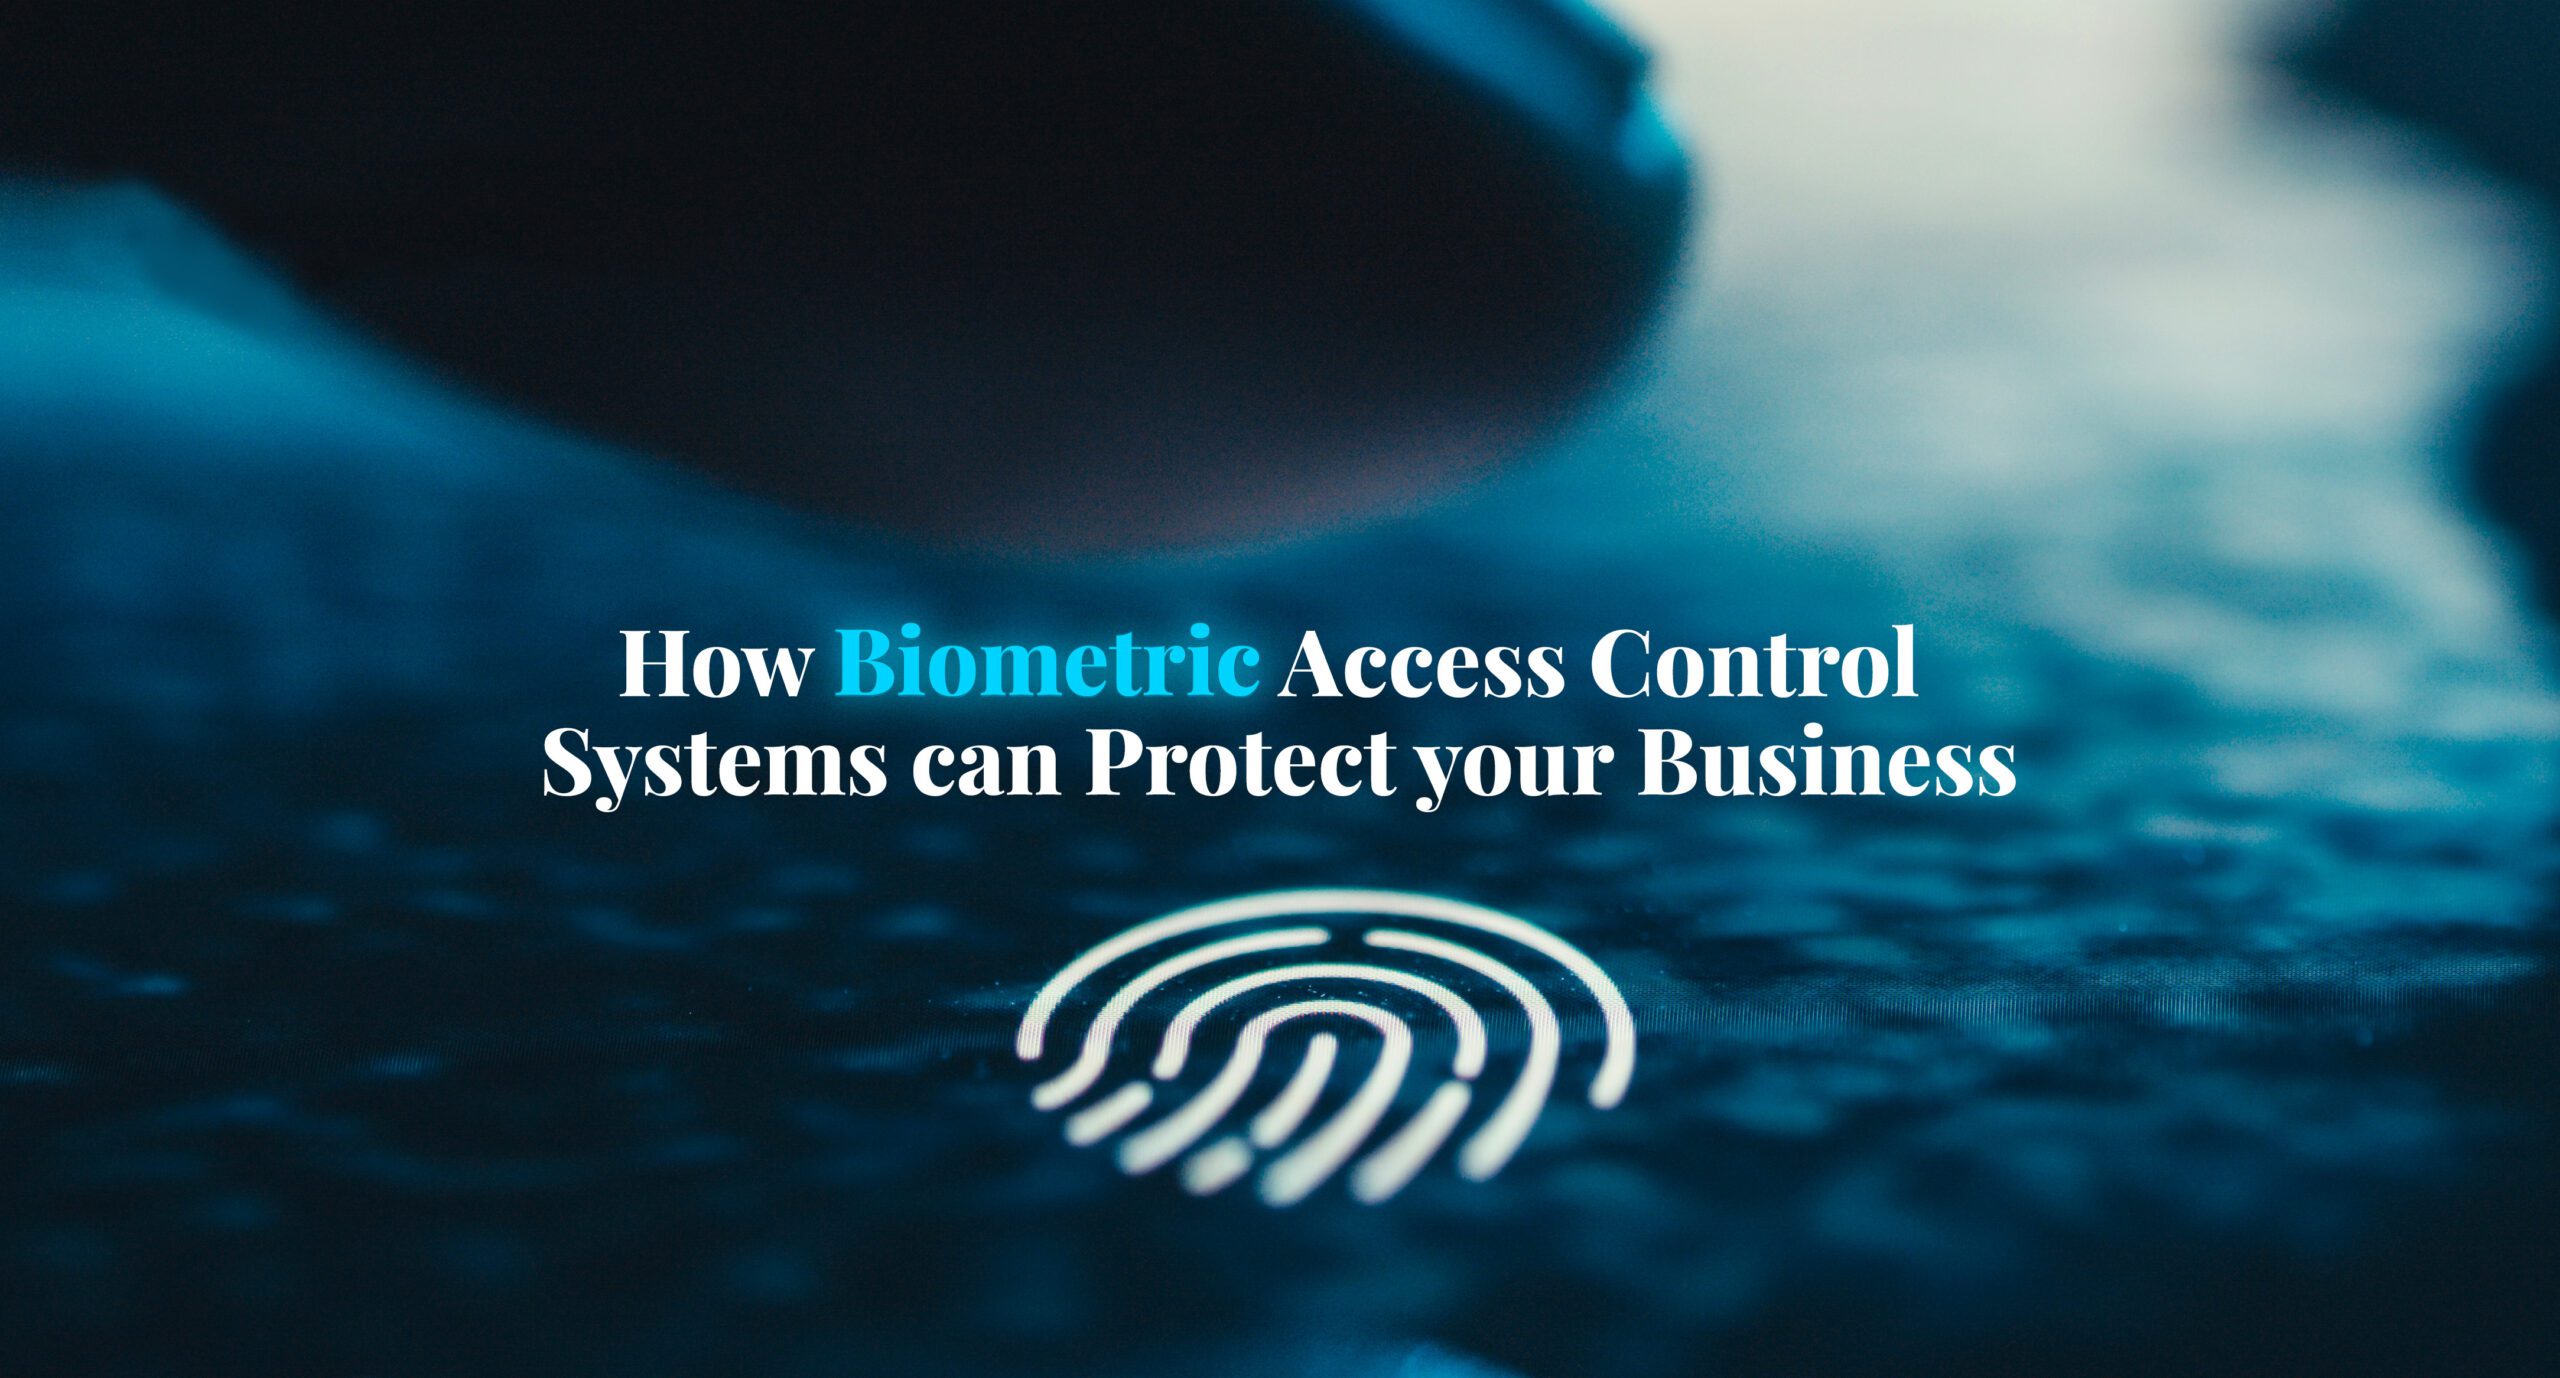 Featured image for “How Biometric Access Control Systems can Protect your Business”